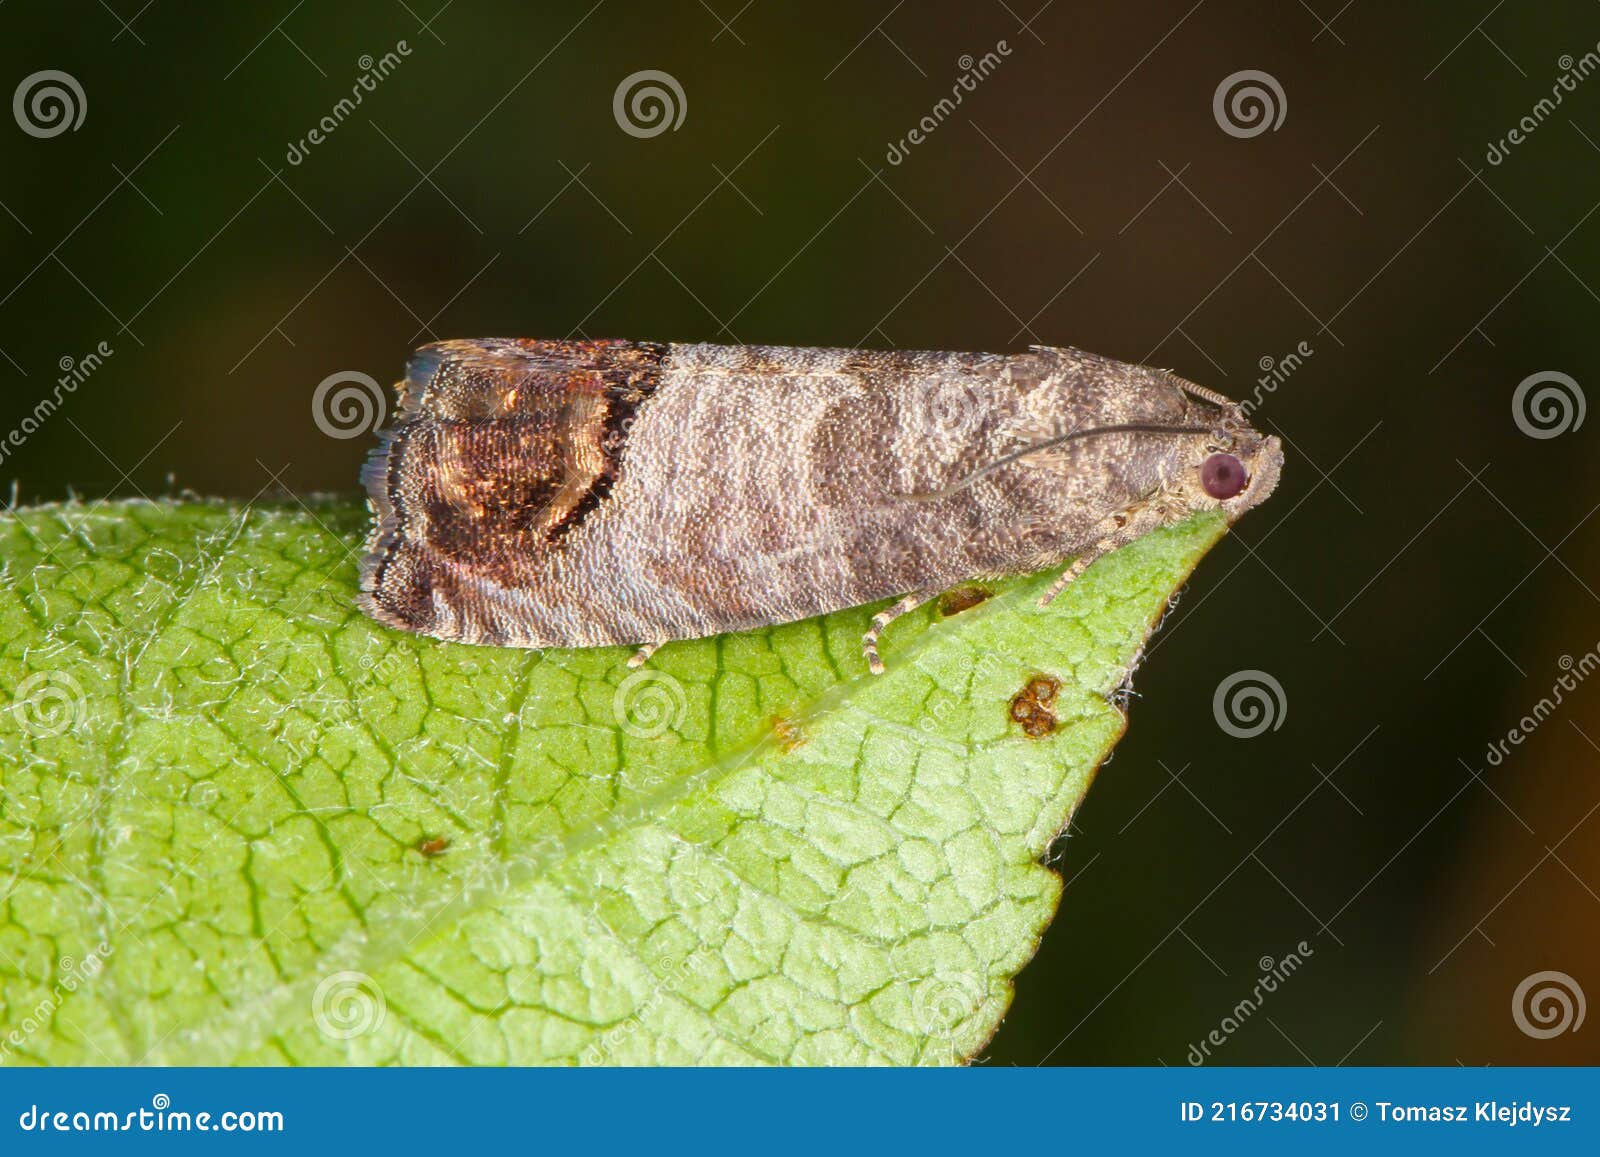 the codling moth cydia pomonella is a member of the lepidopteran family tortricidae. it is major pests to agricultural crops, ma